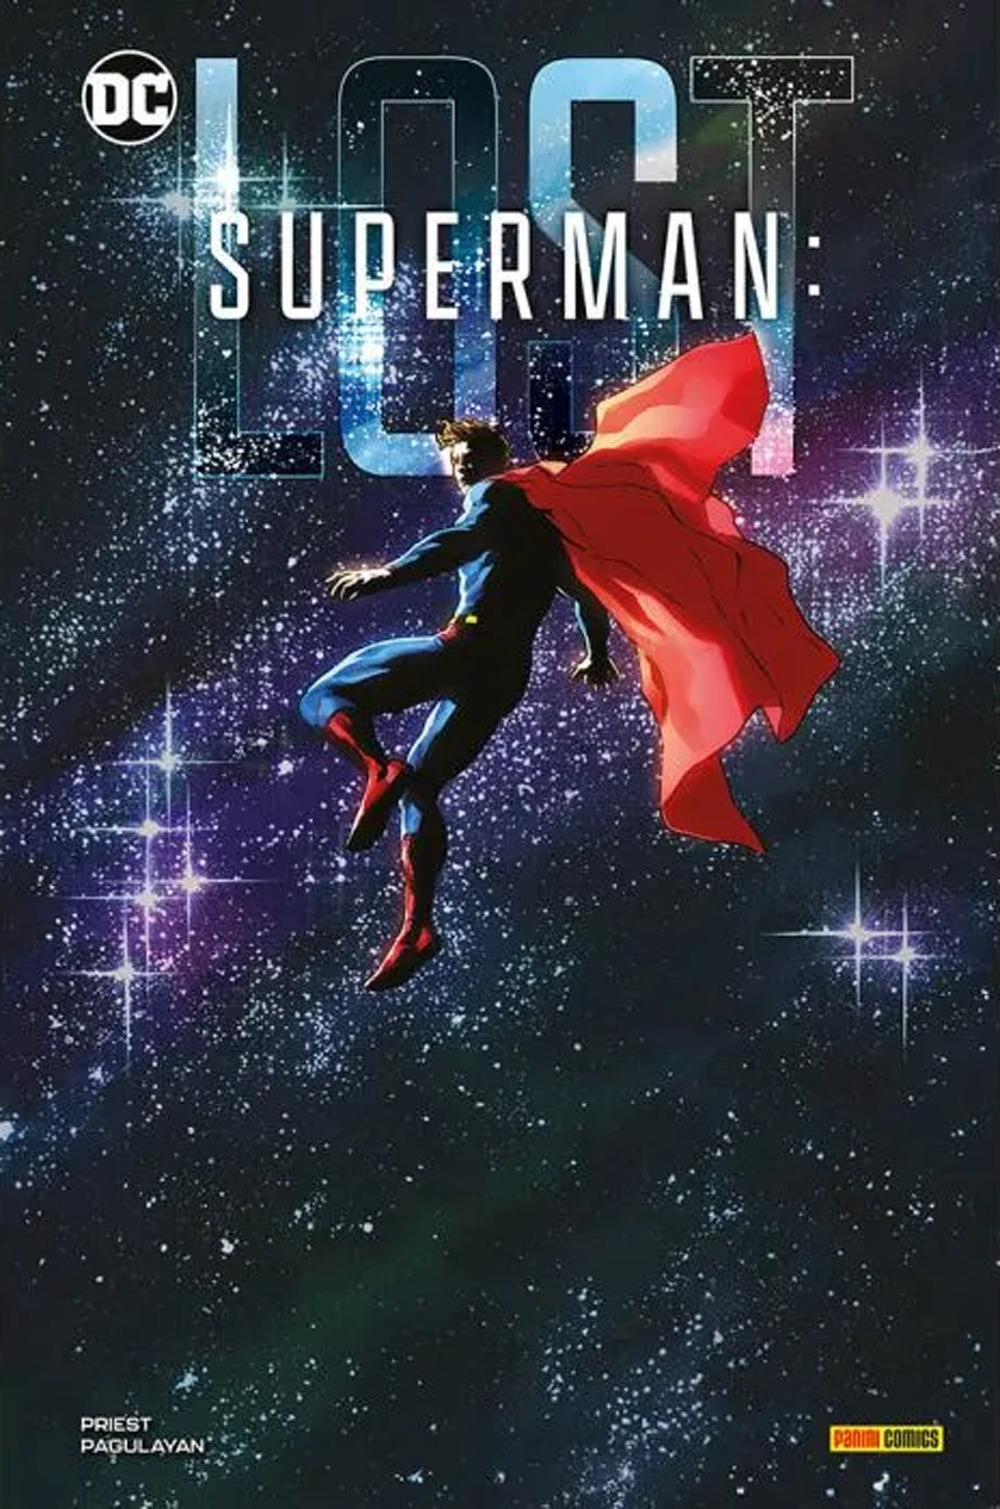 Lost. Superman. DC collection